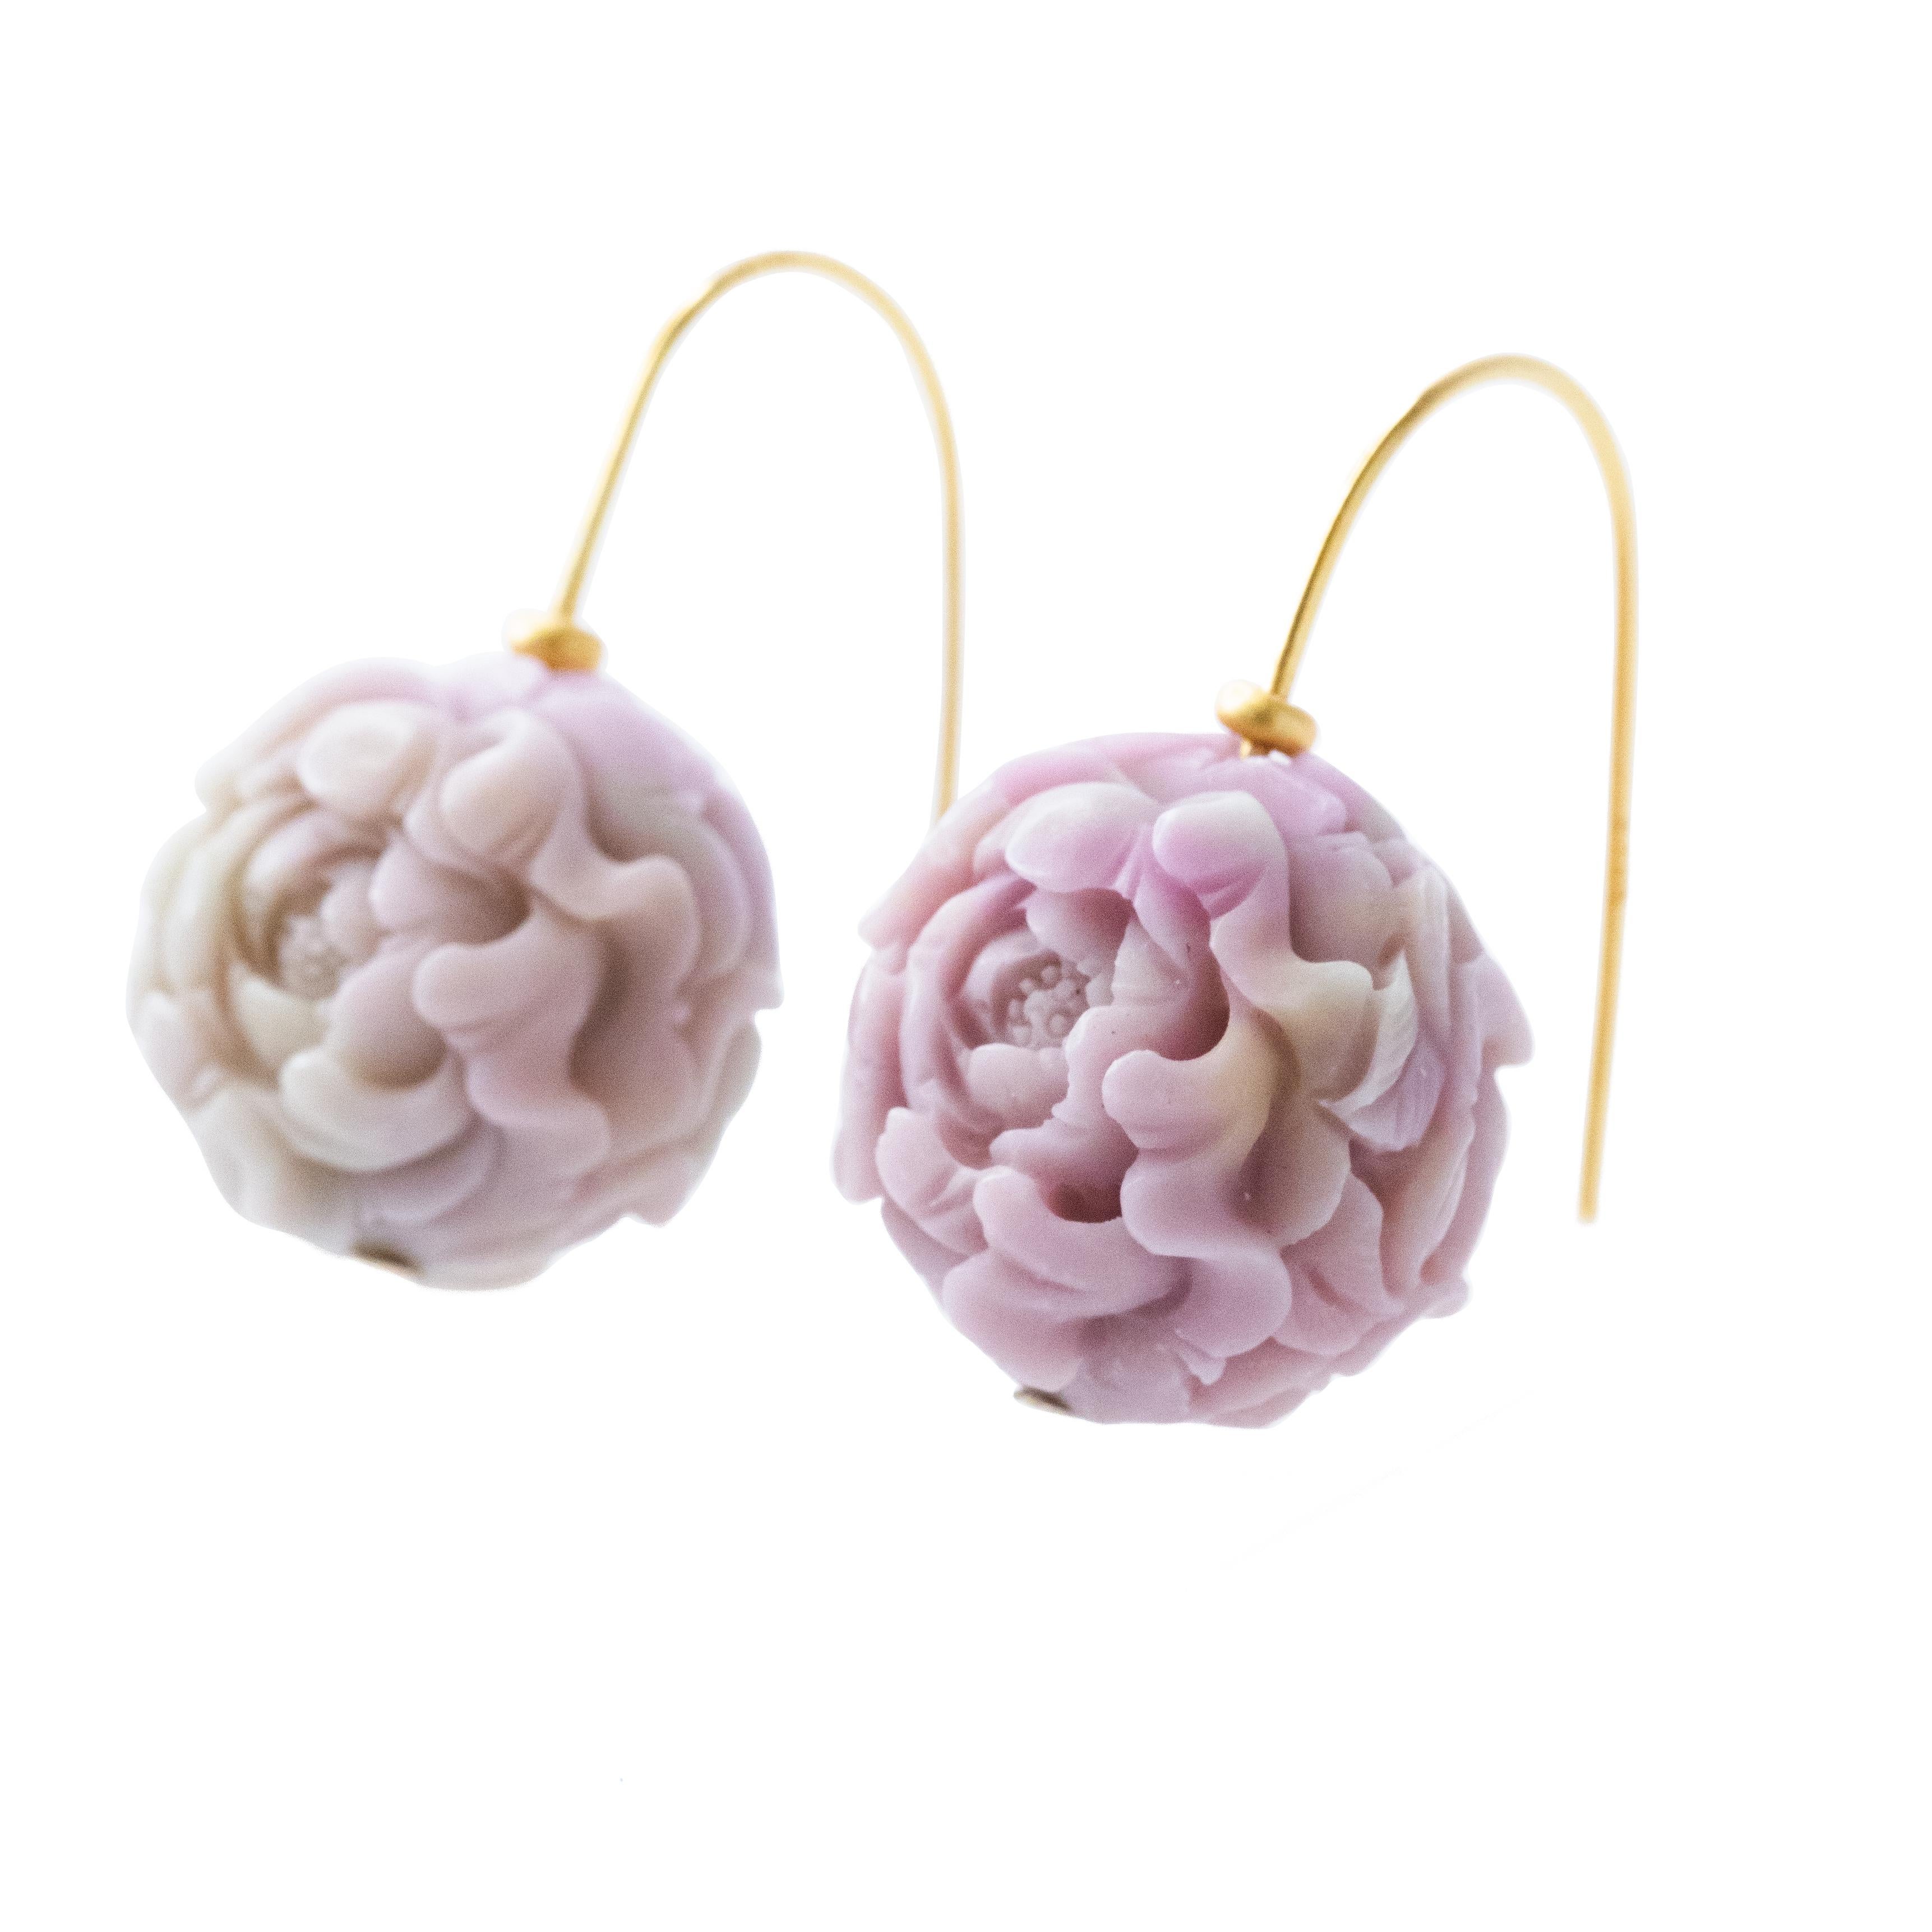 Artisan Pink Agate Peony Flower Earrings - By Bombyx House For Sale